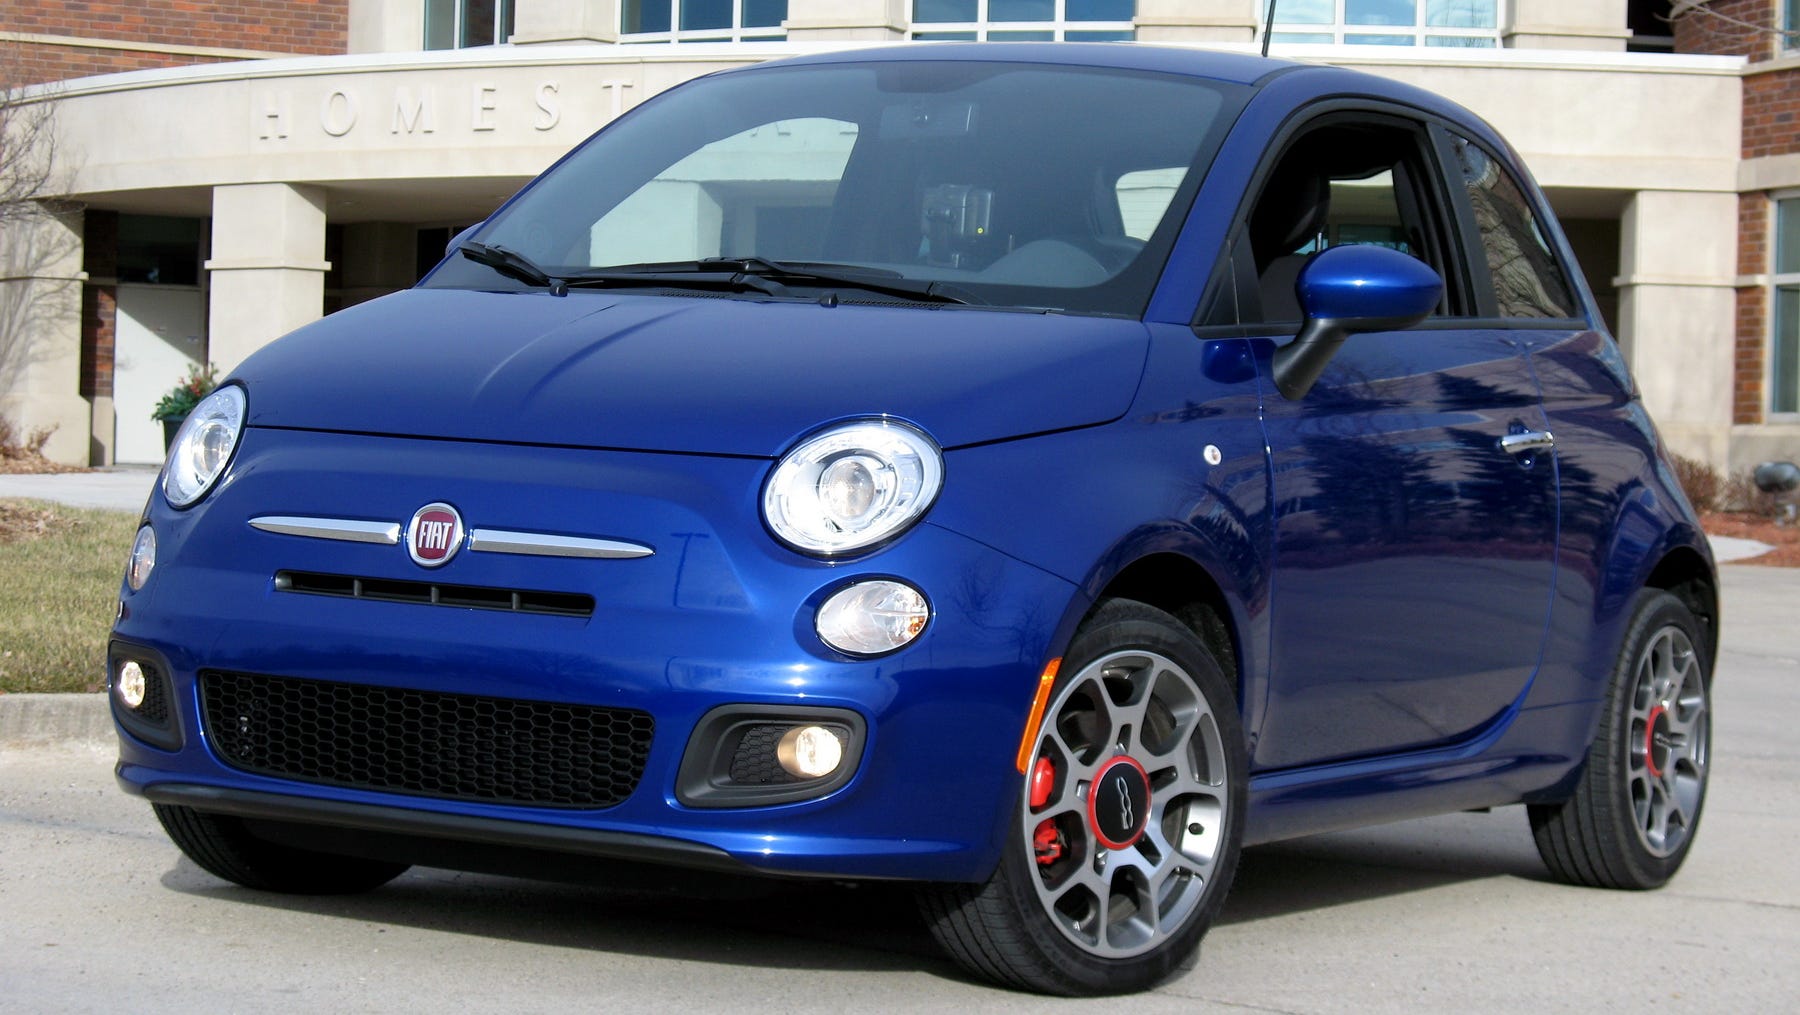 2014 Fiat 500 coupe blends style, value